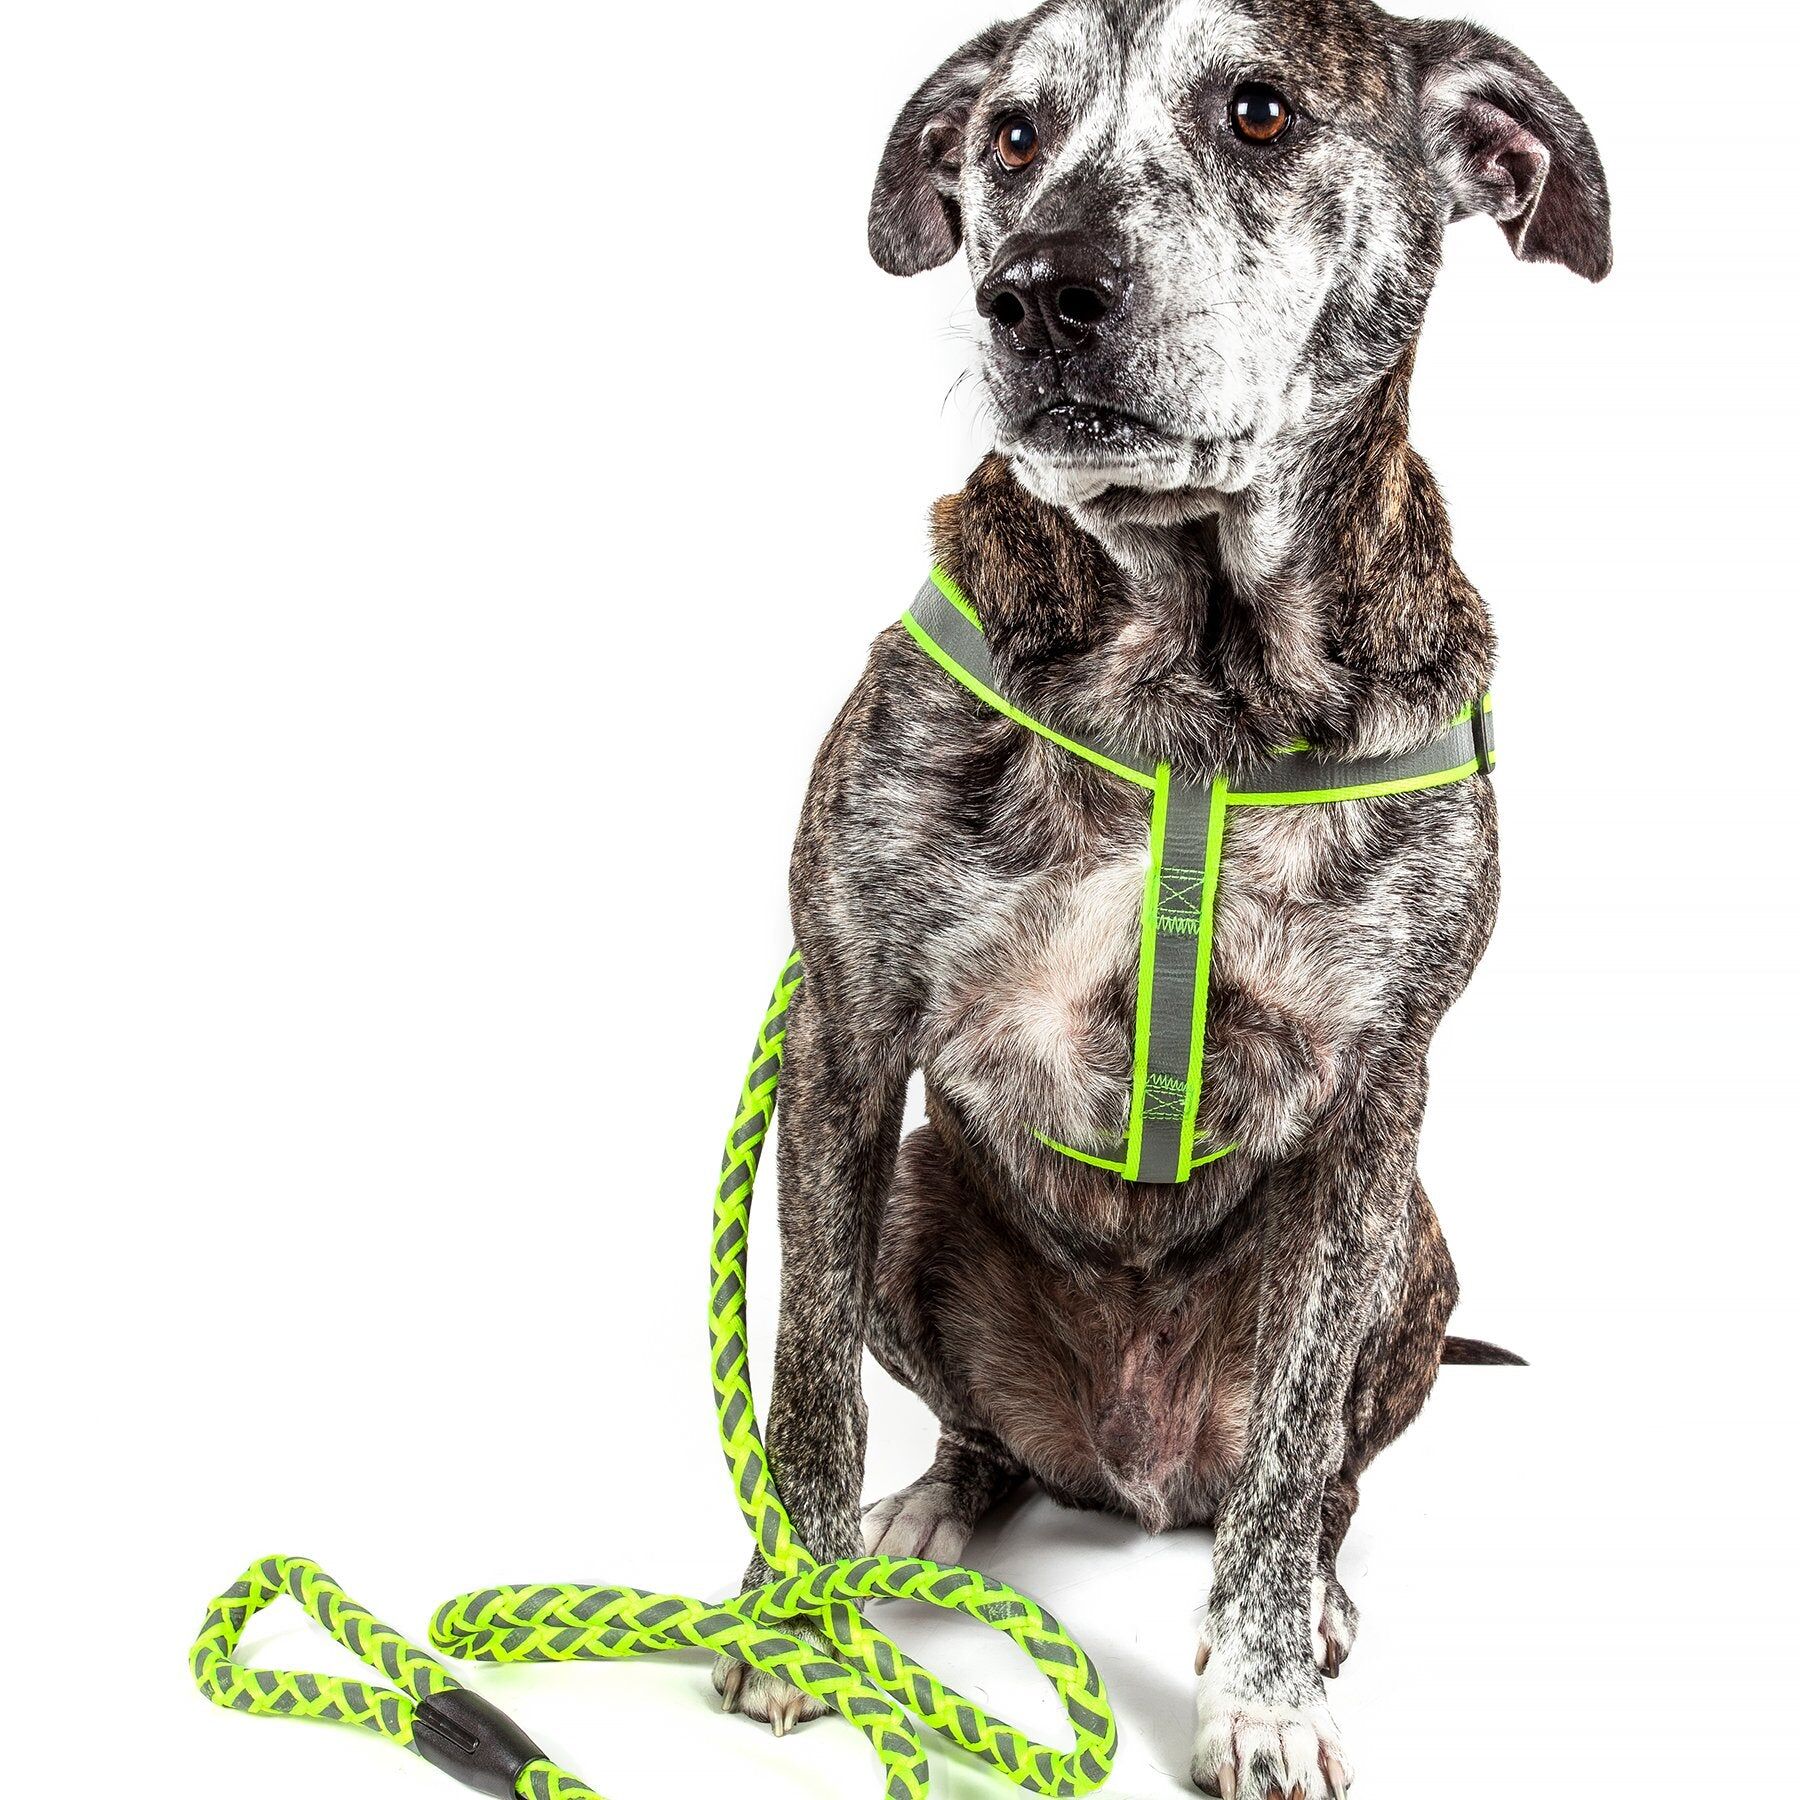 Pet Life 'Easy Tension' Reflective Stitched Adjustable 2-in-1 Pet Dog Leash and Harness Small